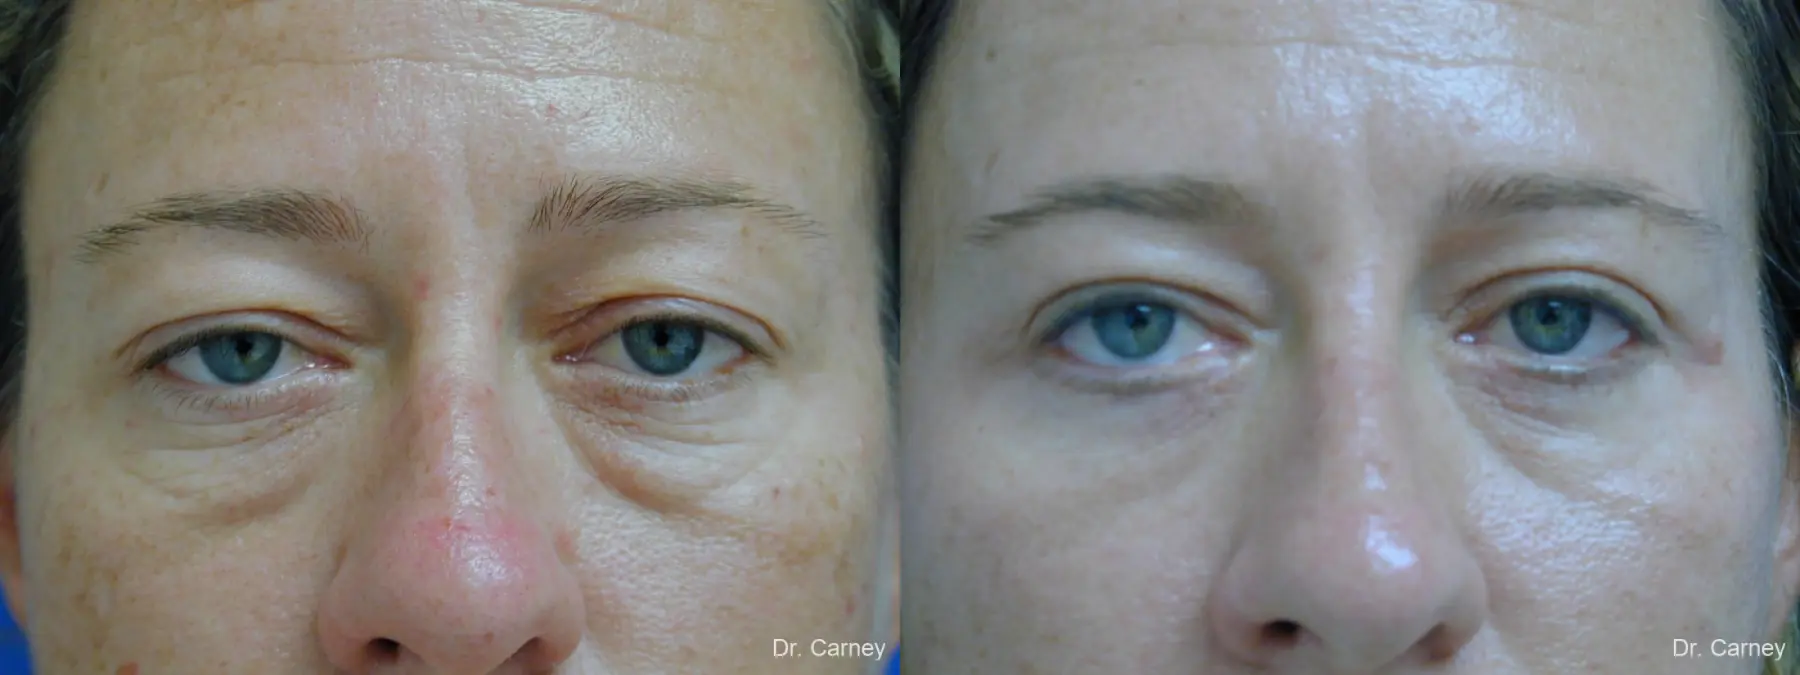 Virginia Beach Eyelid Lift 1209 - Before and After